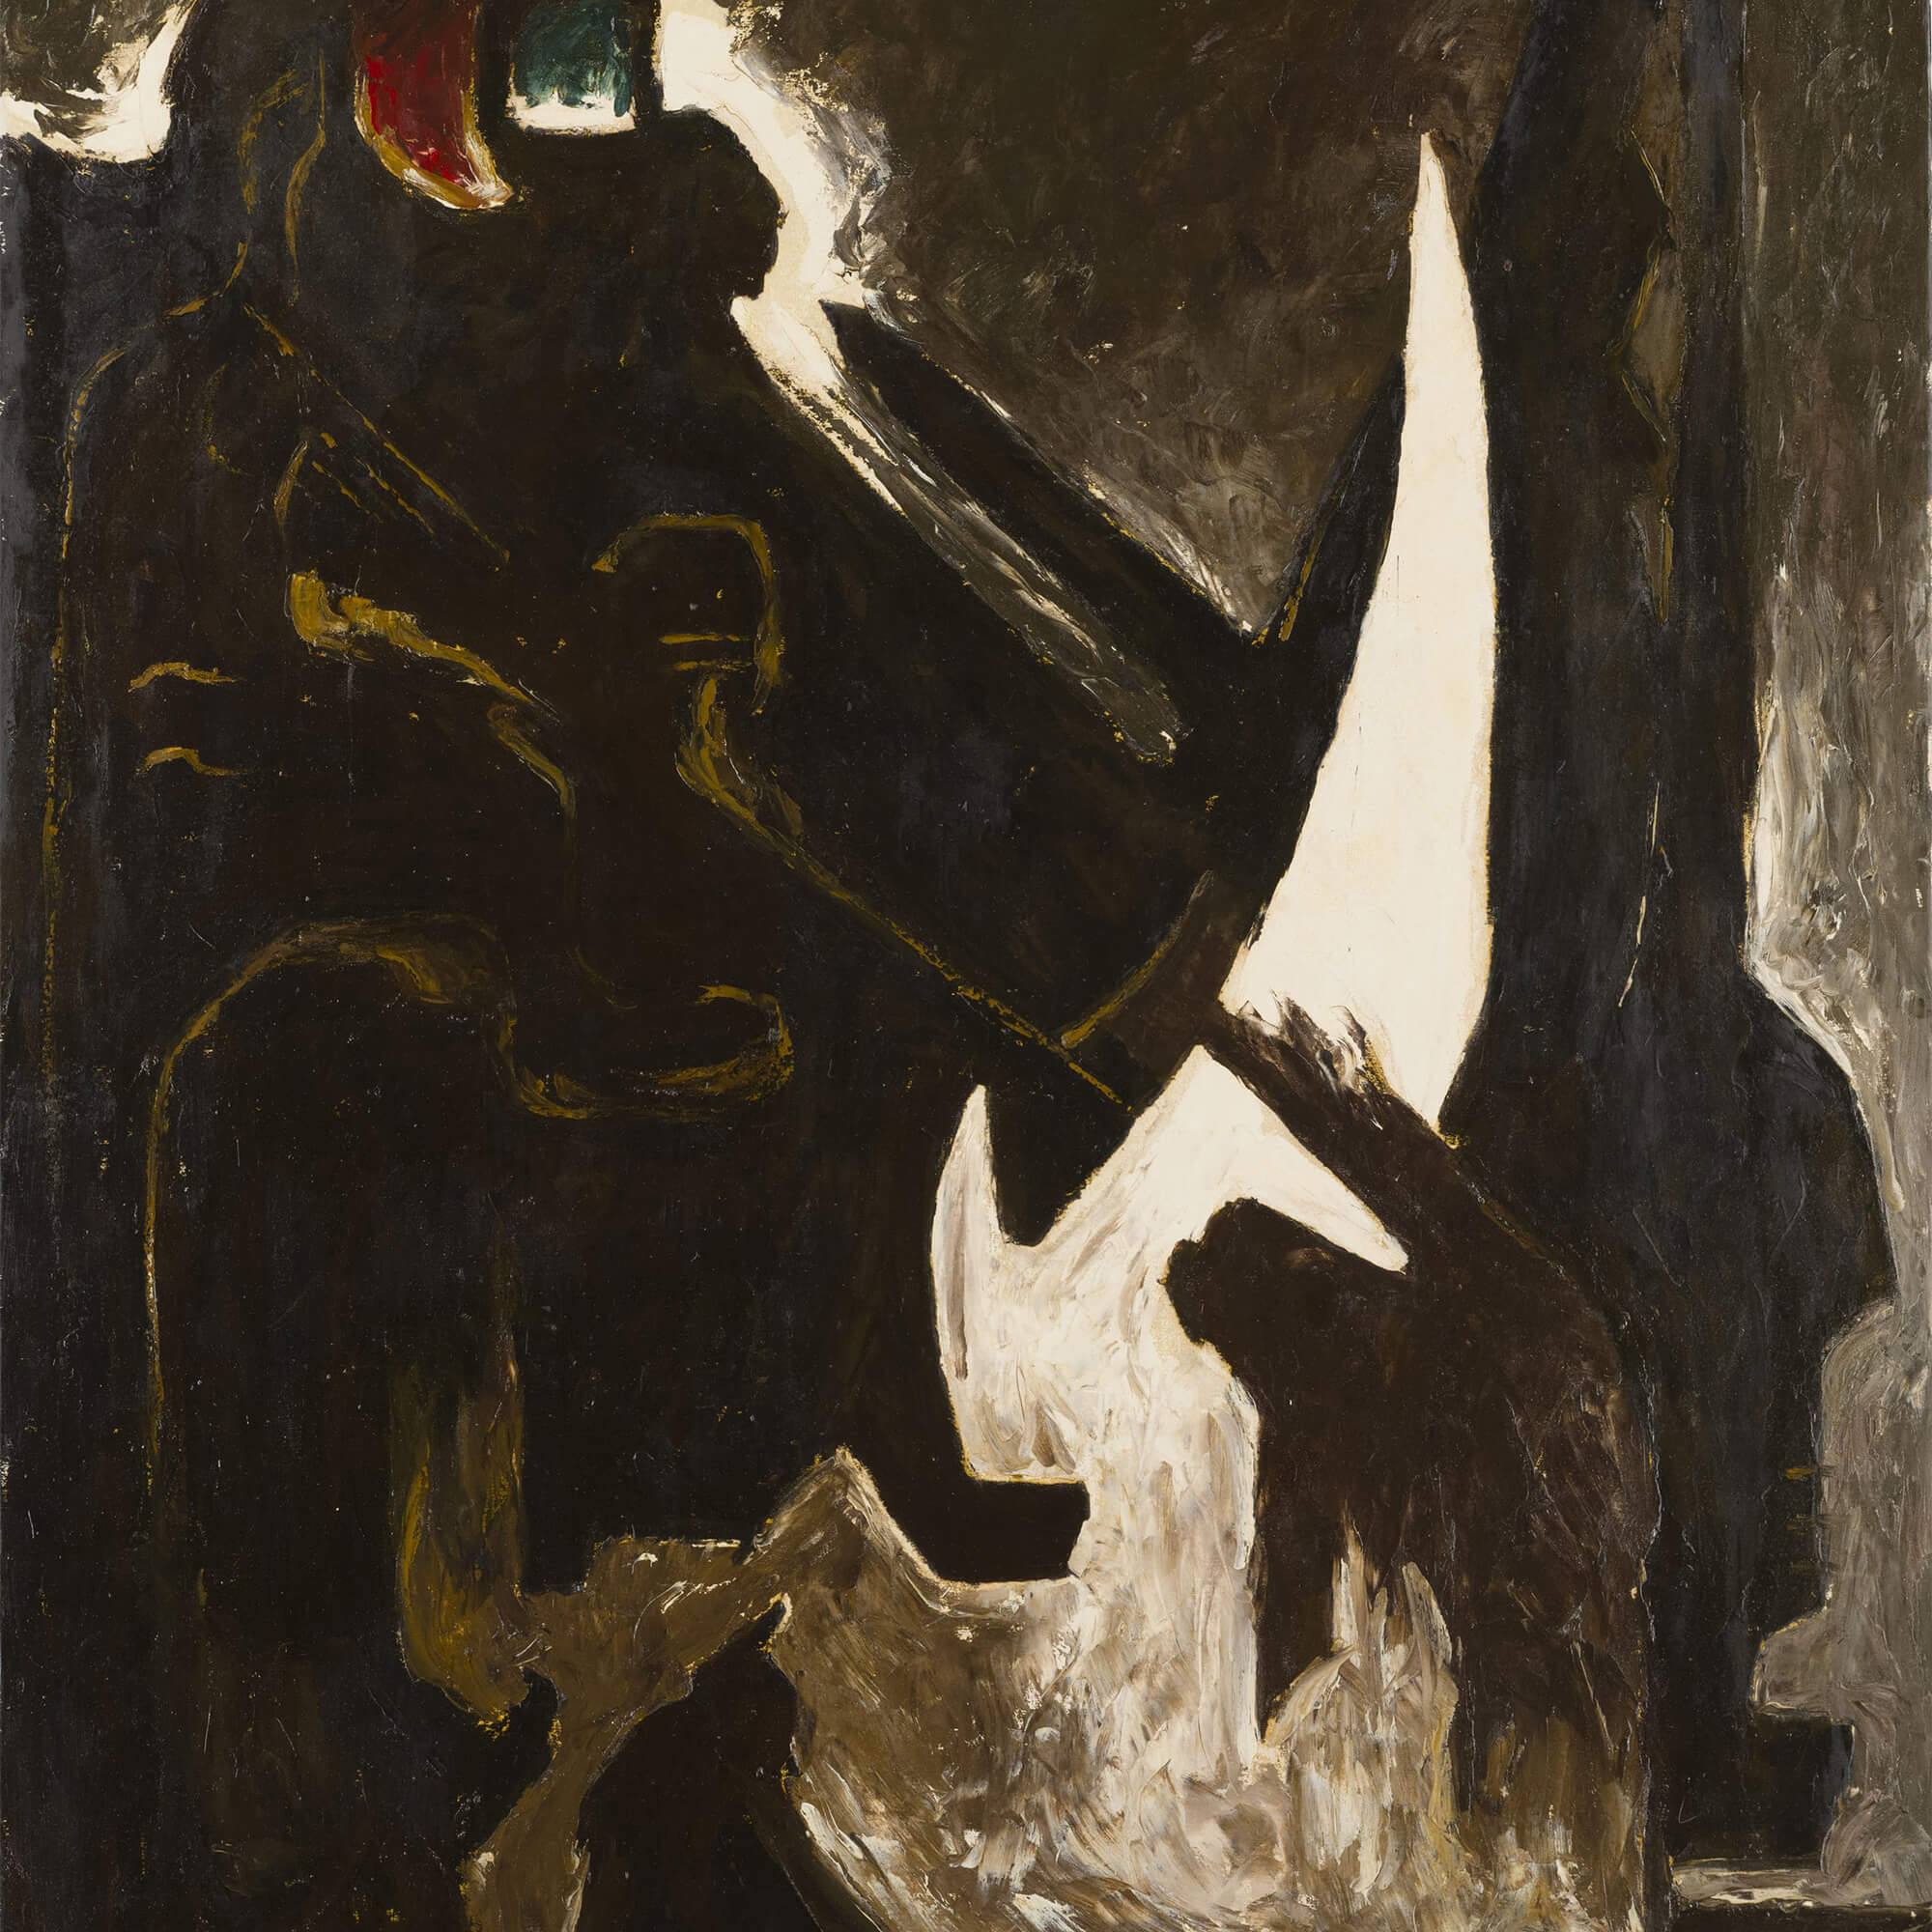 Figure, space, and machinery are all merged and intermingle in this strange, dark painting. The ground is painted with thick strokes of brown, black and cream. What we might understand to be the background in the top right corner winds down along the right edge and ultimately becomes the most prominent white blade-like form we see in the foreground, thus confusing and flattening space. From the center of the blade-like form, unrecognizable tool-like forms are painted in deep blacks and browns and create a strong diagonal up to the top left corner of the painting where three finger-like shapes are painted in shades of red and green. Behind the white blade object, another black vertical jagged saw-like form recedes into the background. The right and bottom edges of the composition are completely filled with abstract puzzle-piece shapes in shades of cream, brown and black.